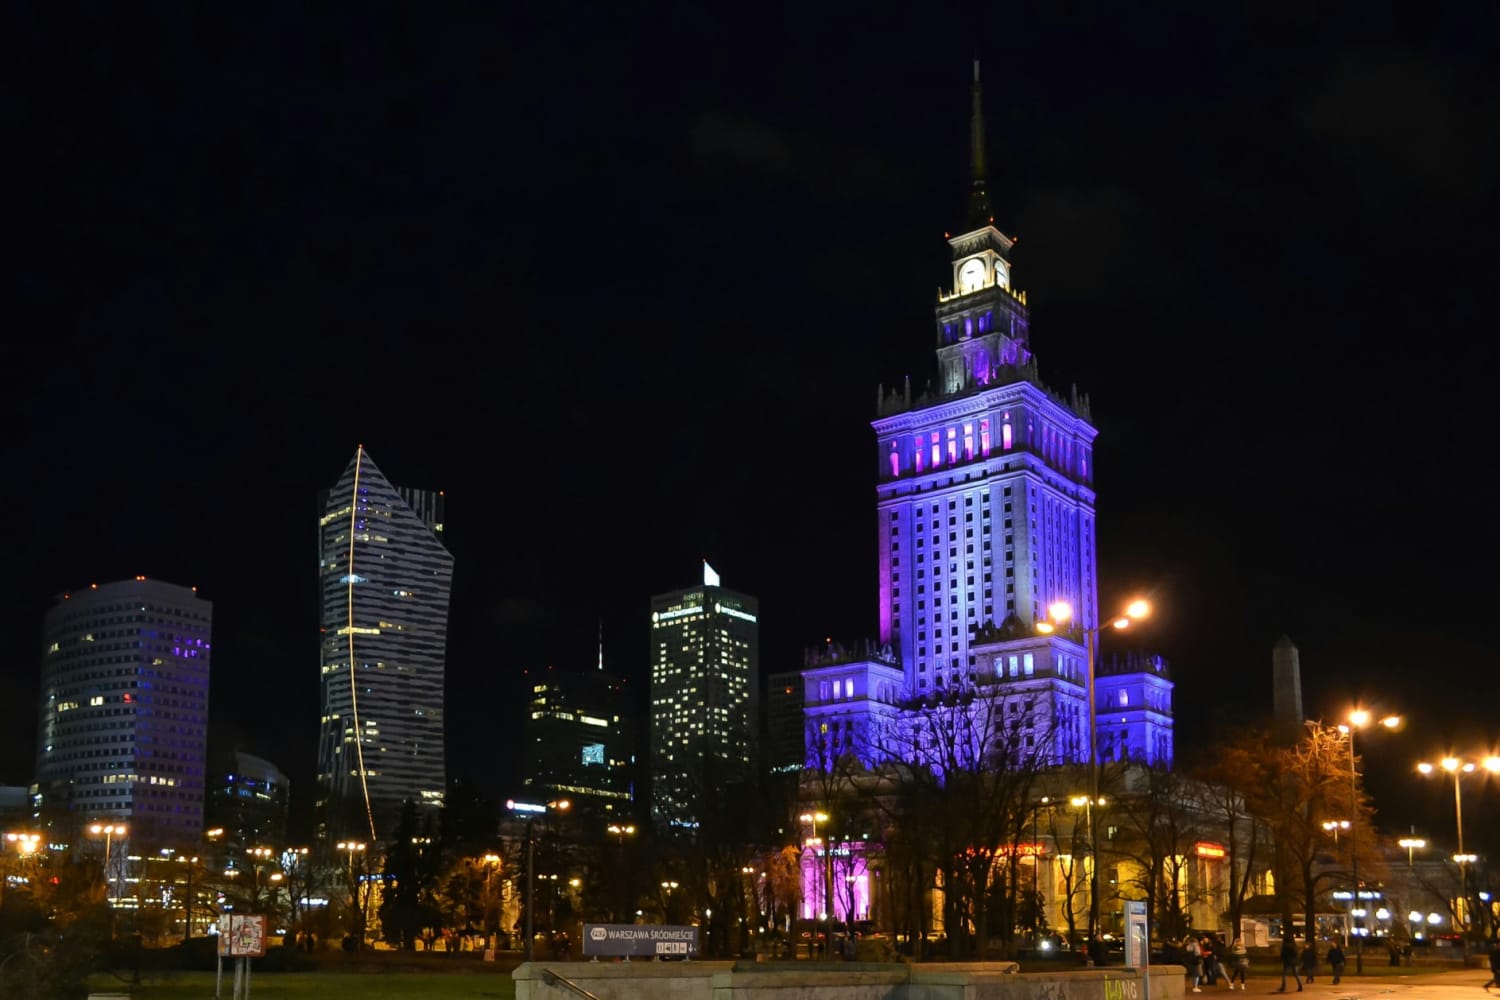 In pictures: Warsaw streets at night in January